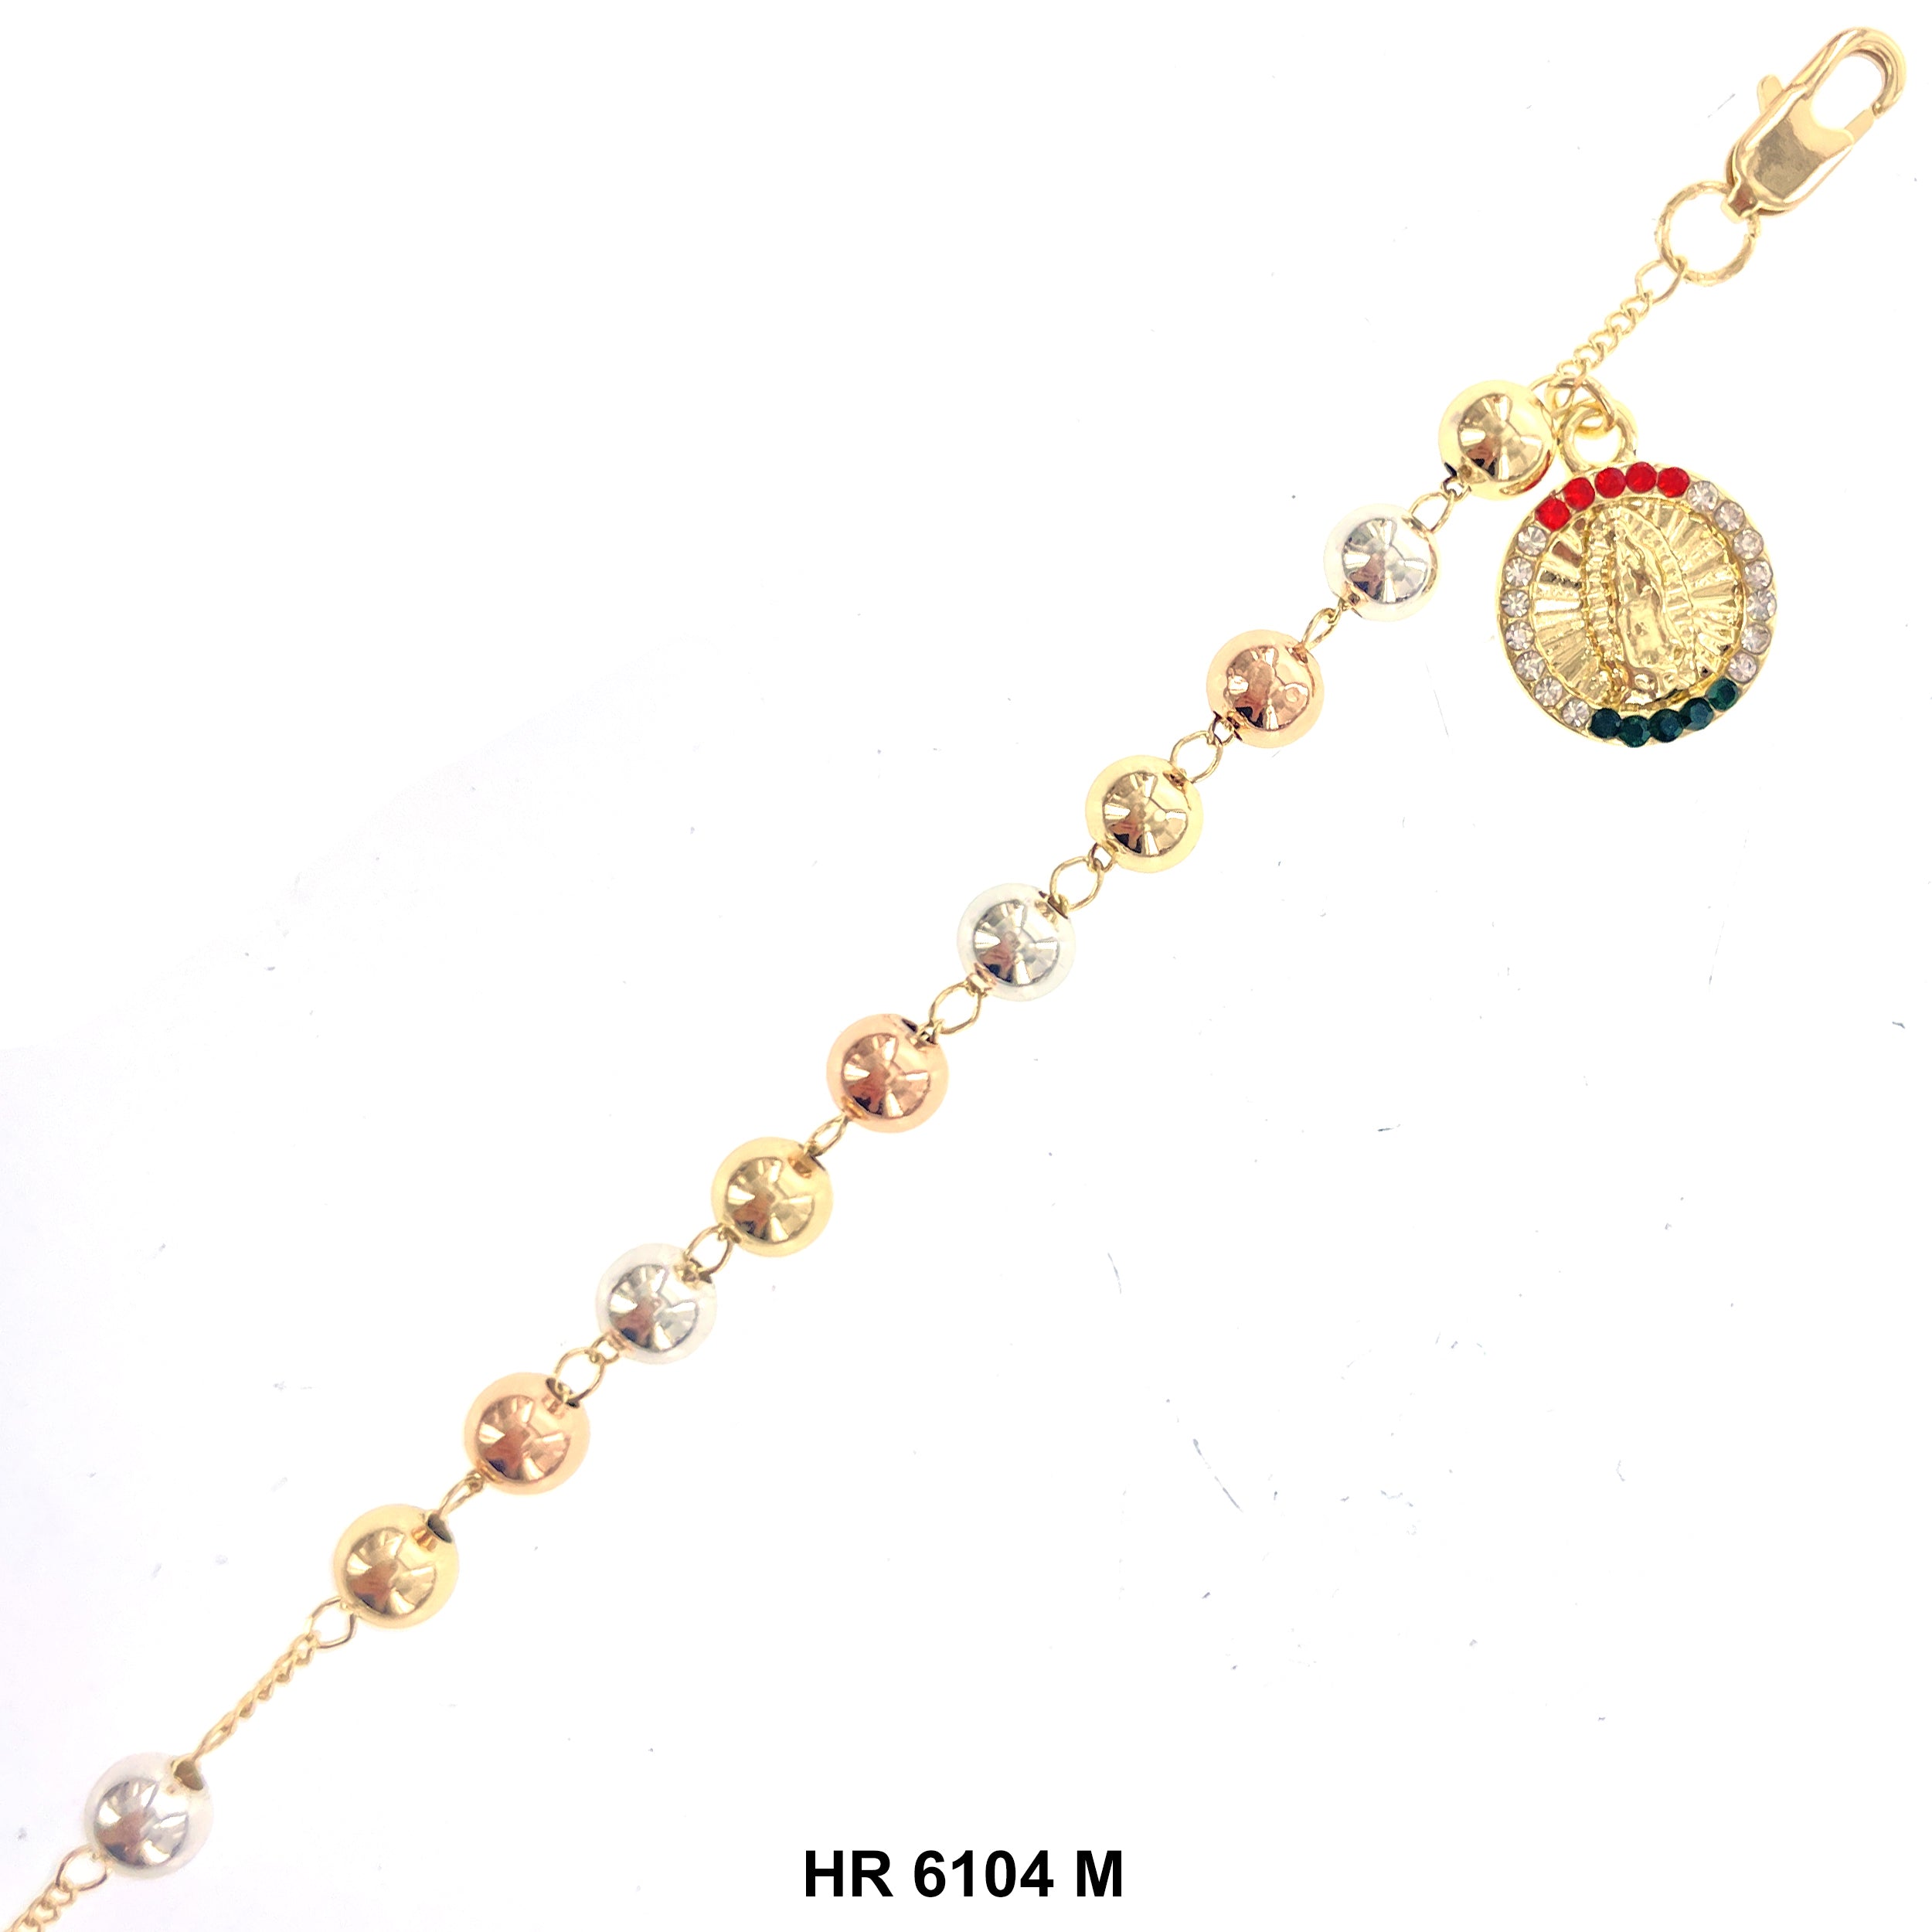 6 MM Hand Rosary Guadalupe HR 6104 M